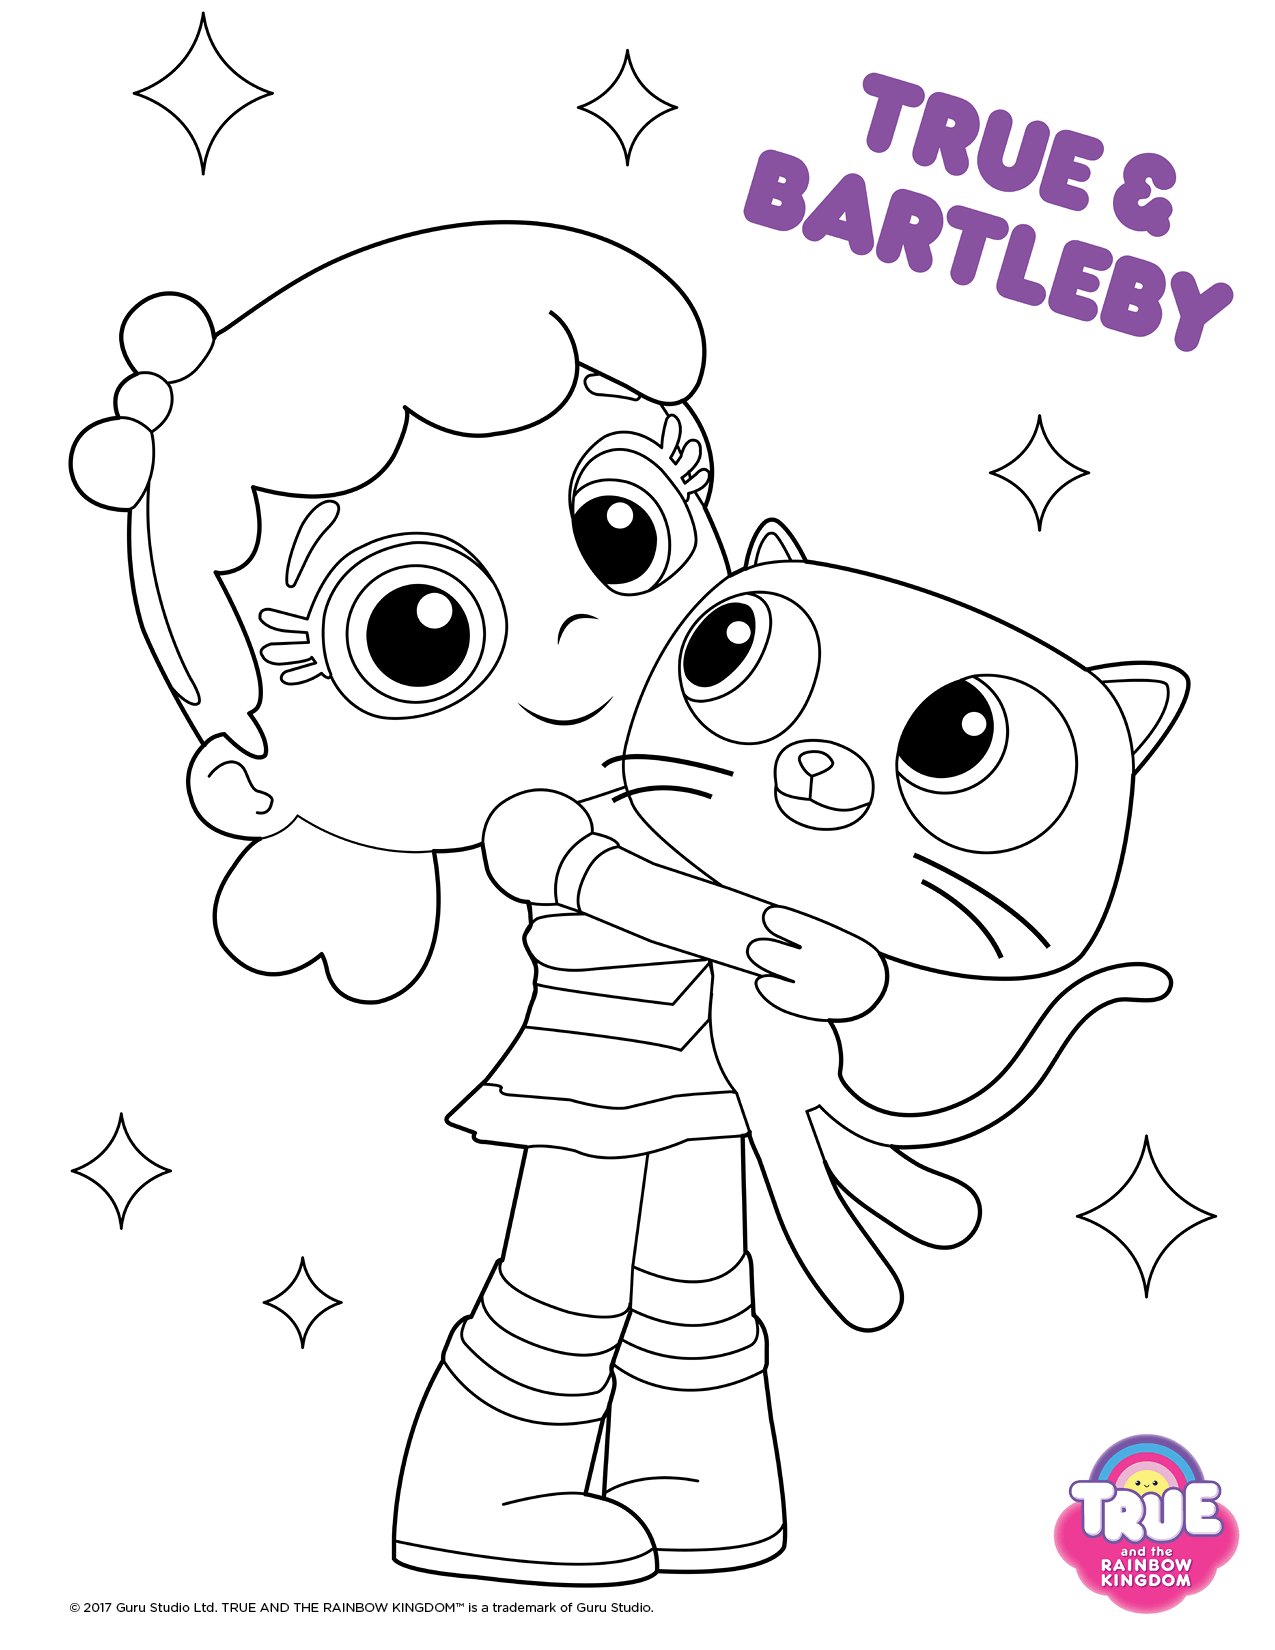 True and Bartleby from True and the Rainbow Kingdom Coloring Images